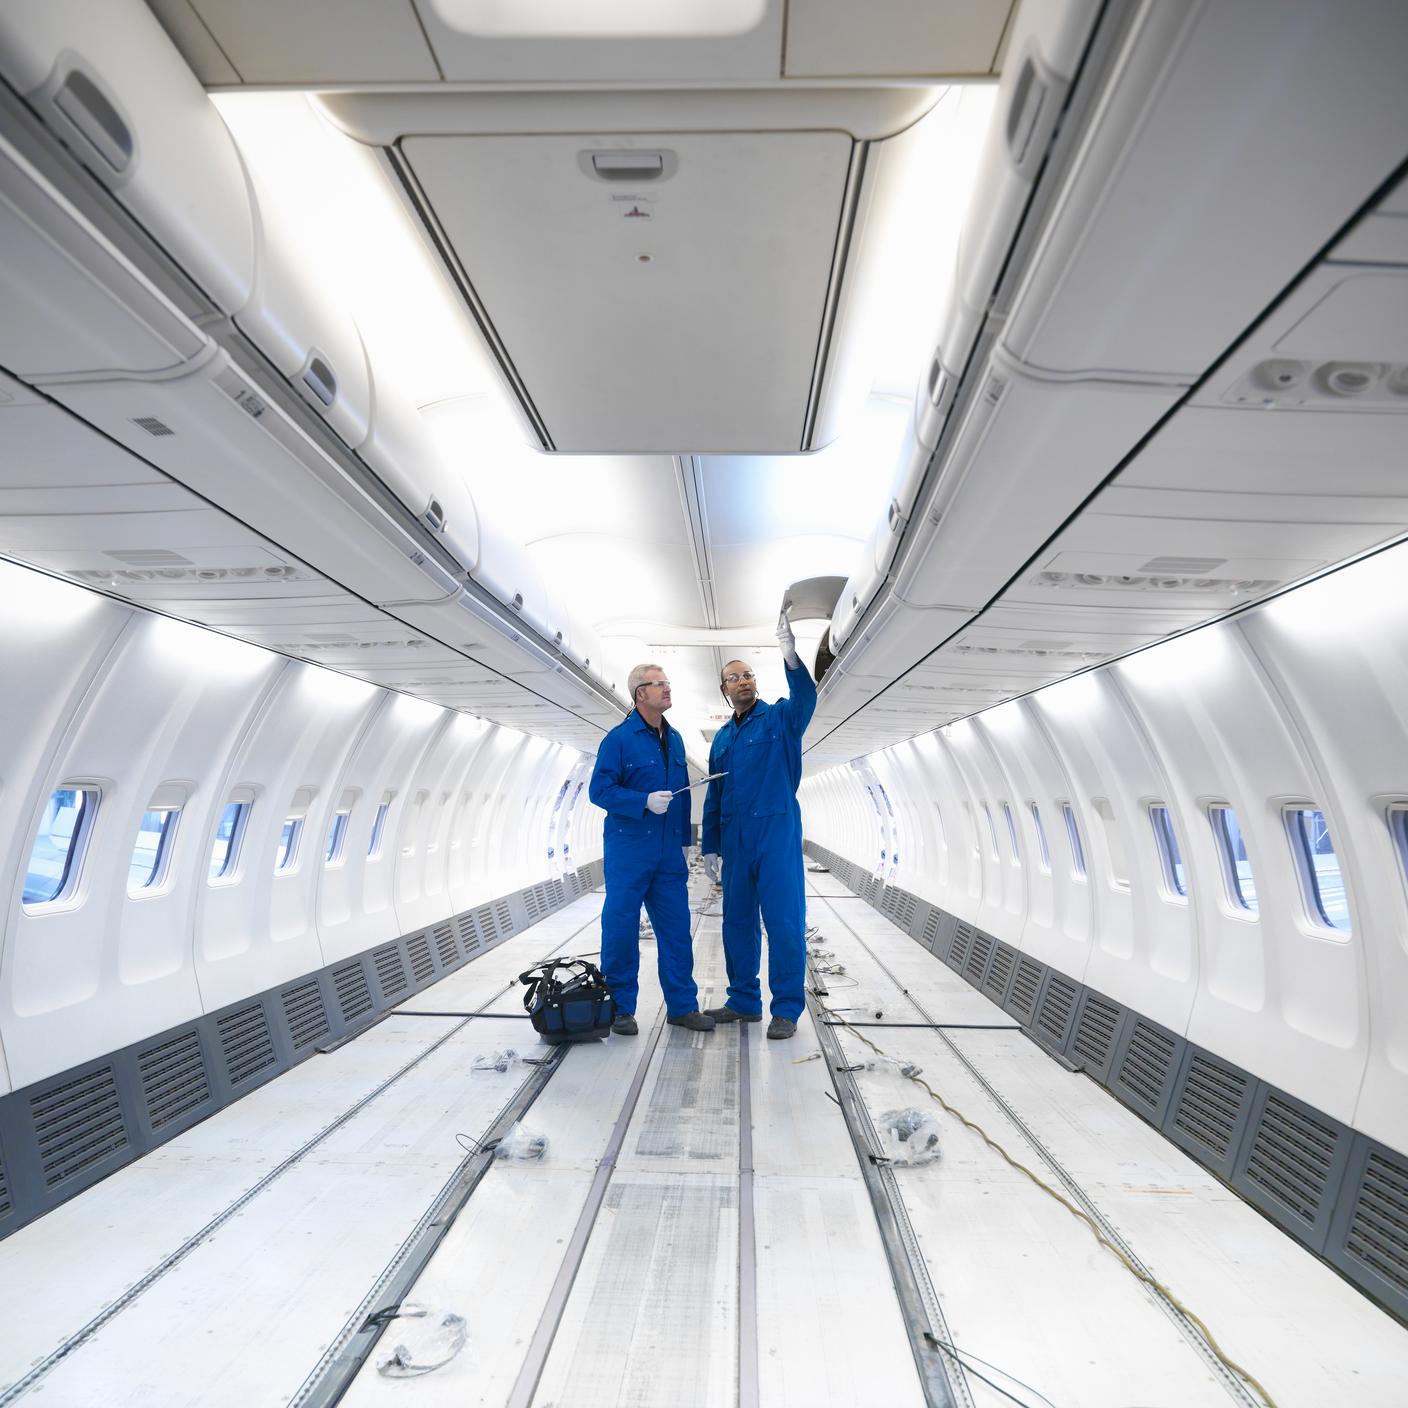 Aircraft engineers working on interior of 737 jet airplane